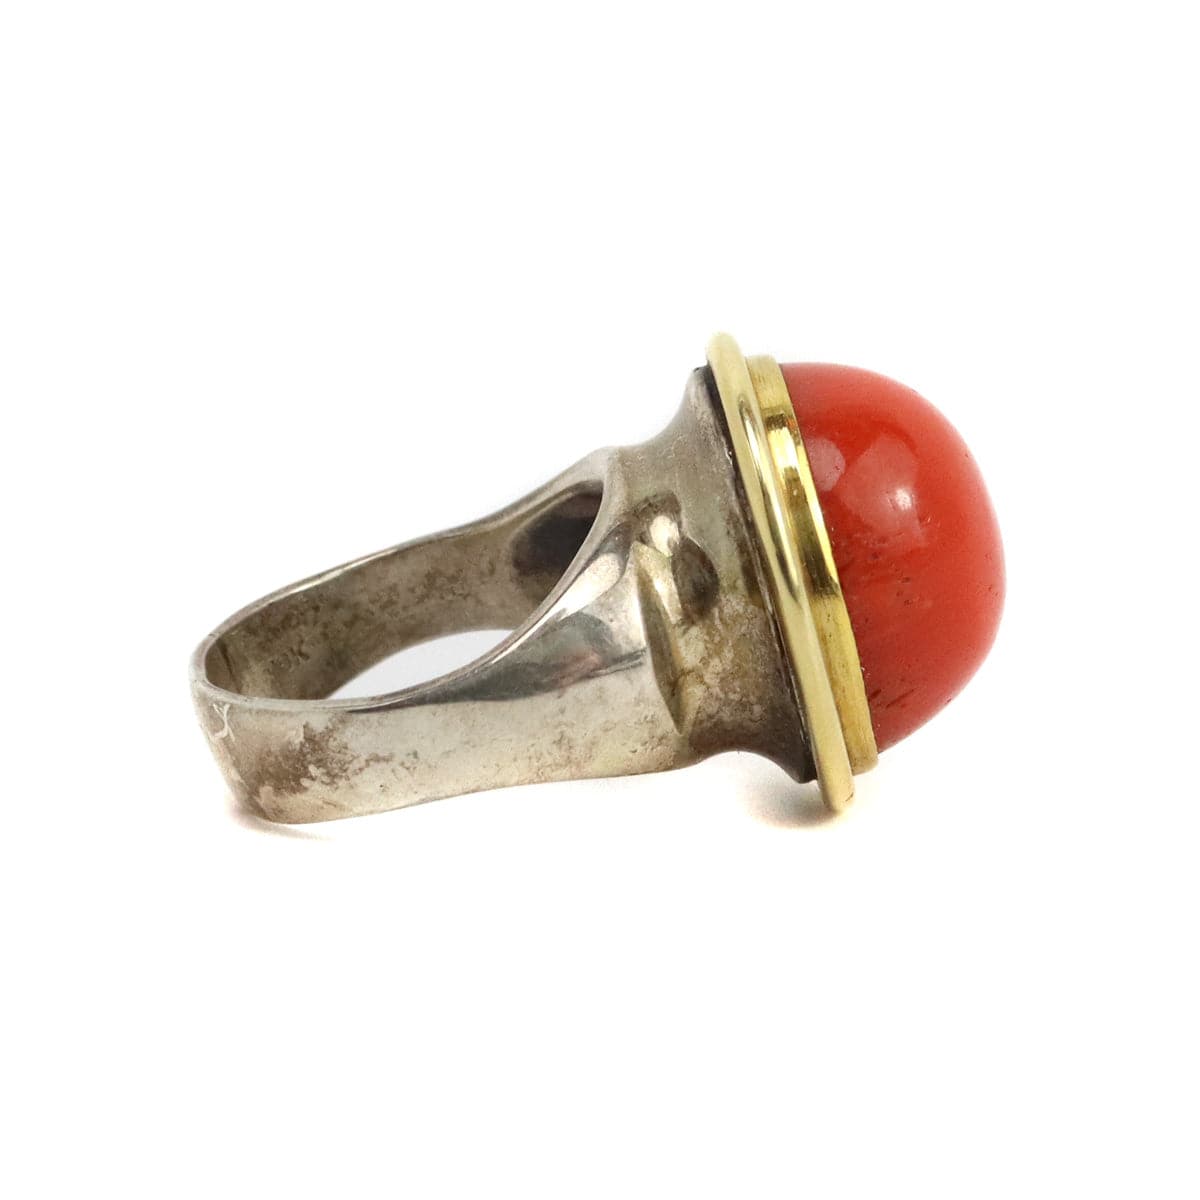 Frank Frank Jr. - Coral, 18K Gold, and Sterling Silver Ring, size 10.25 (J91699-0123-010) 2